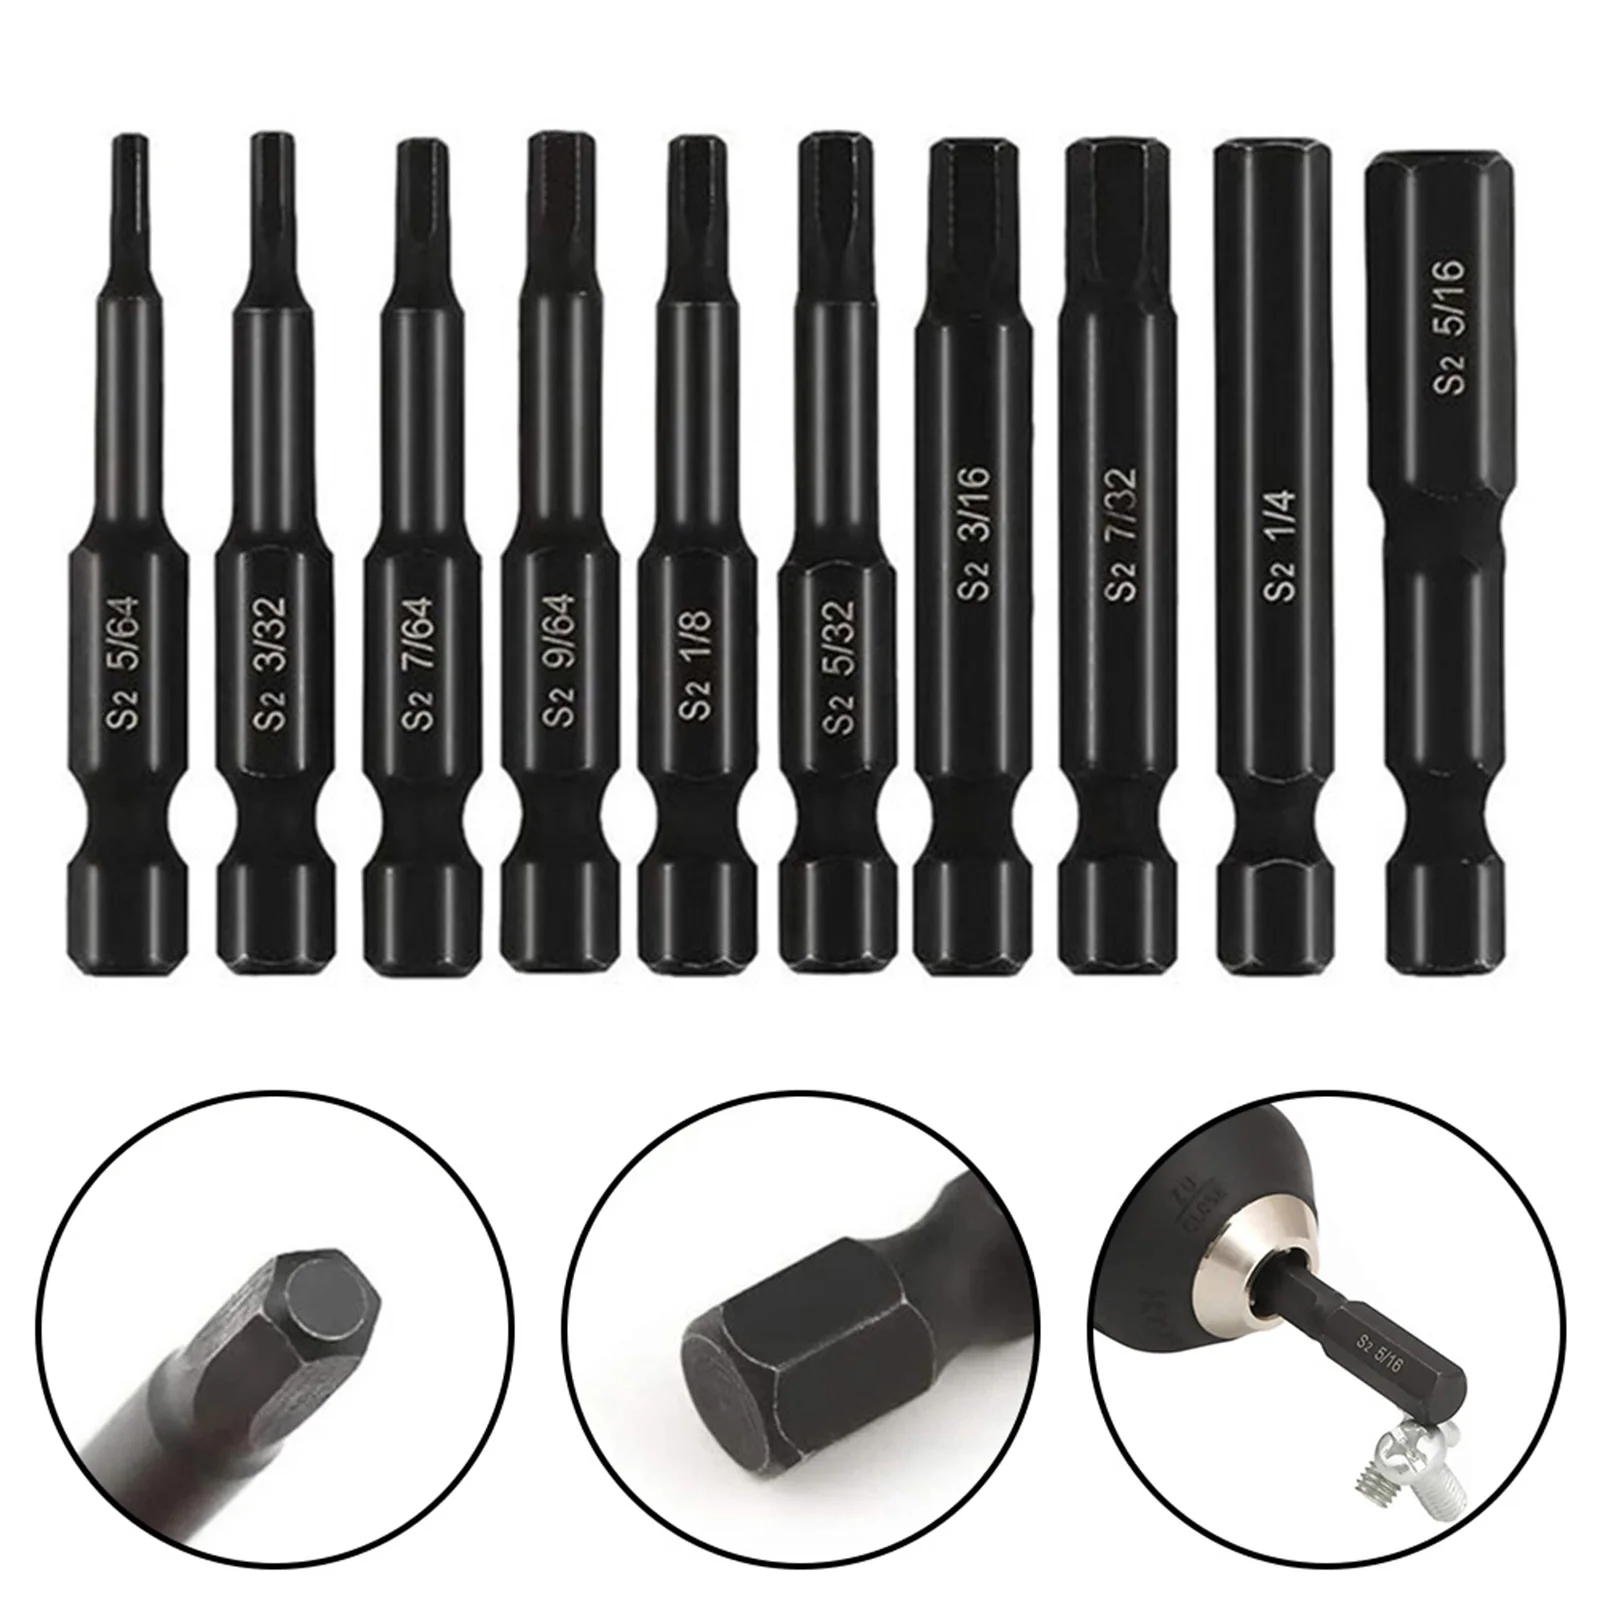 

10PCS Alloy Steel 1/4inch Shank Magnetic Screwdriver Bit SAE Hex Head Allen Wrench Drill Bit Set Quick Release Hand Tools